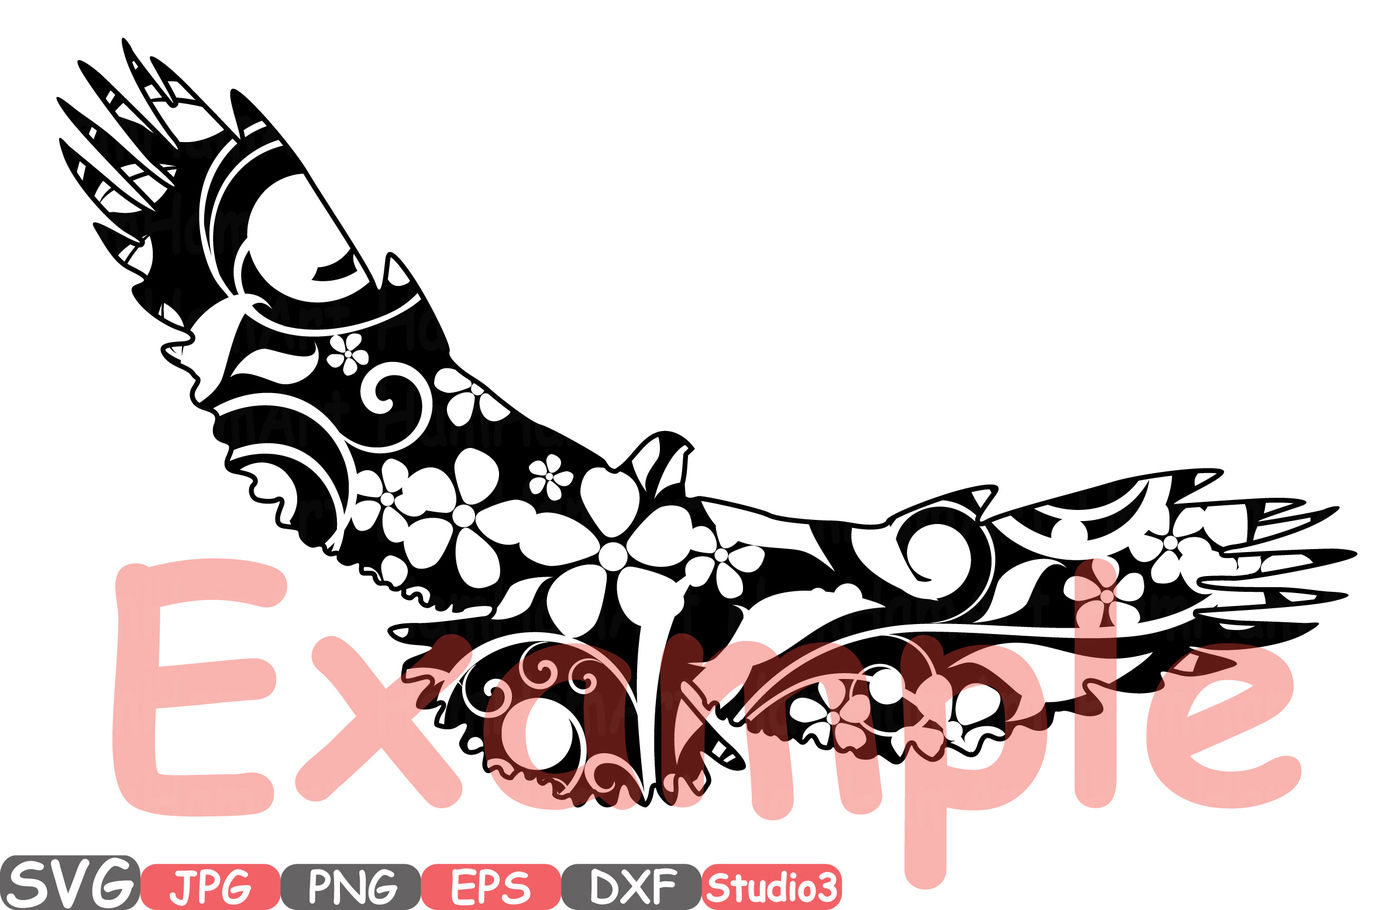 ori 77914 a7ea98edc59d353007524a92d3ee31f1e4b1731b eagle floral mascot woodland flower cricut design studio3 cameo monogram circle cutting files svg silhouette school clipart illustration eps png dxf zoo vector 368s